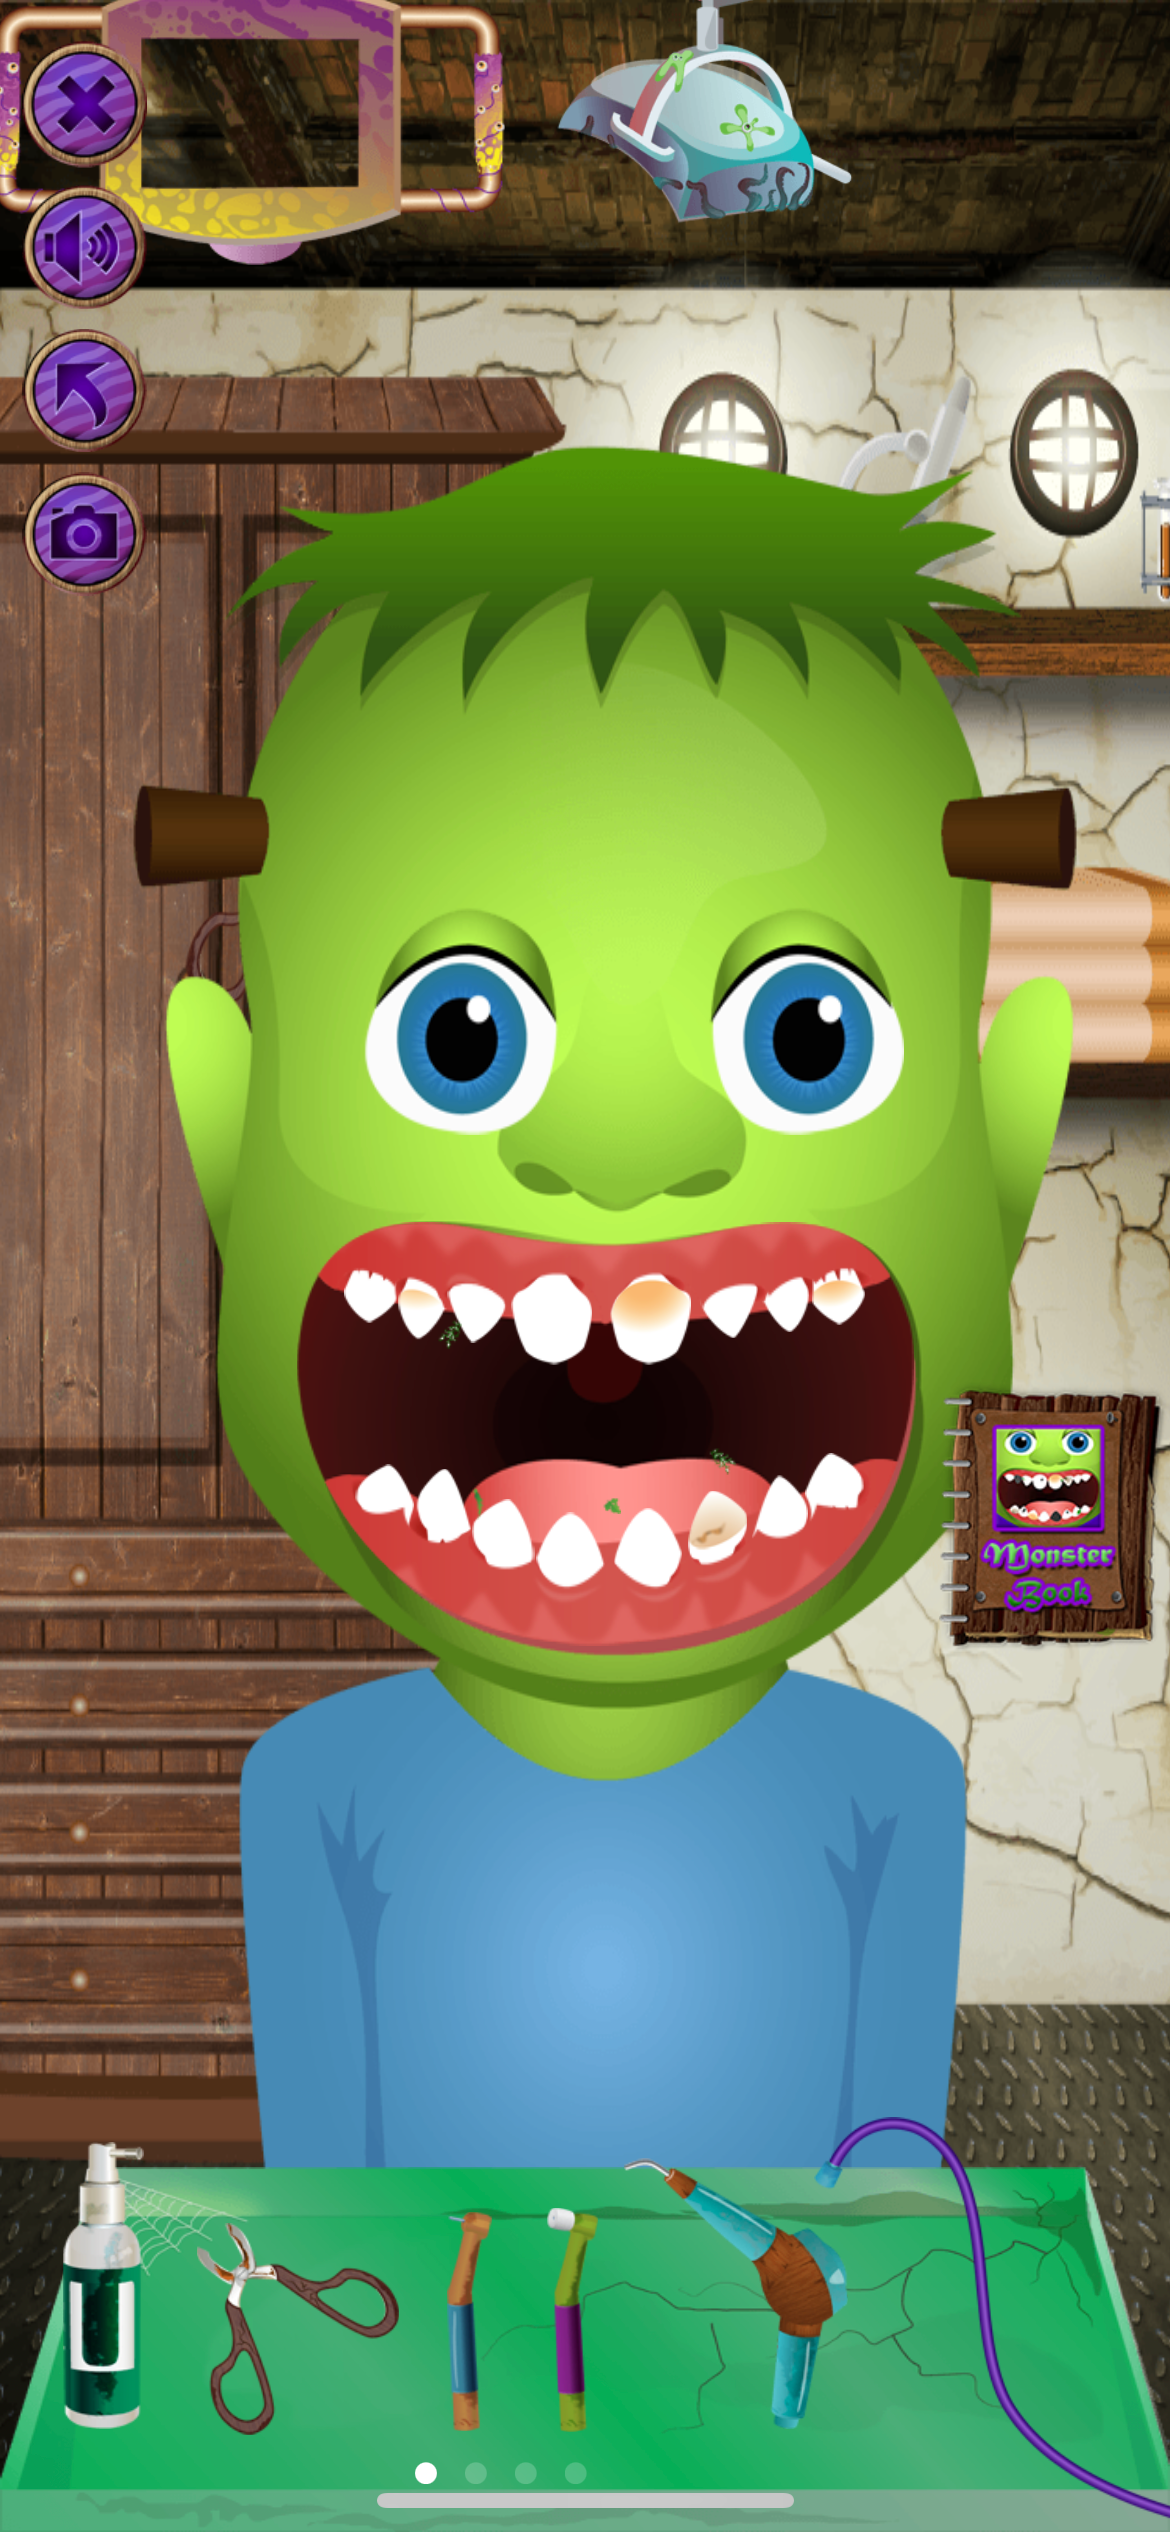 Monster Dentist App Screenshot, showing the first monster in the game